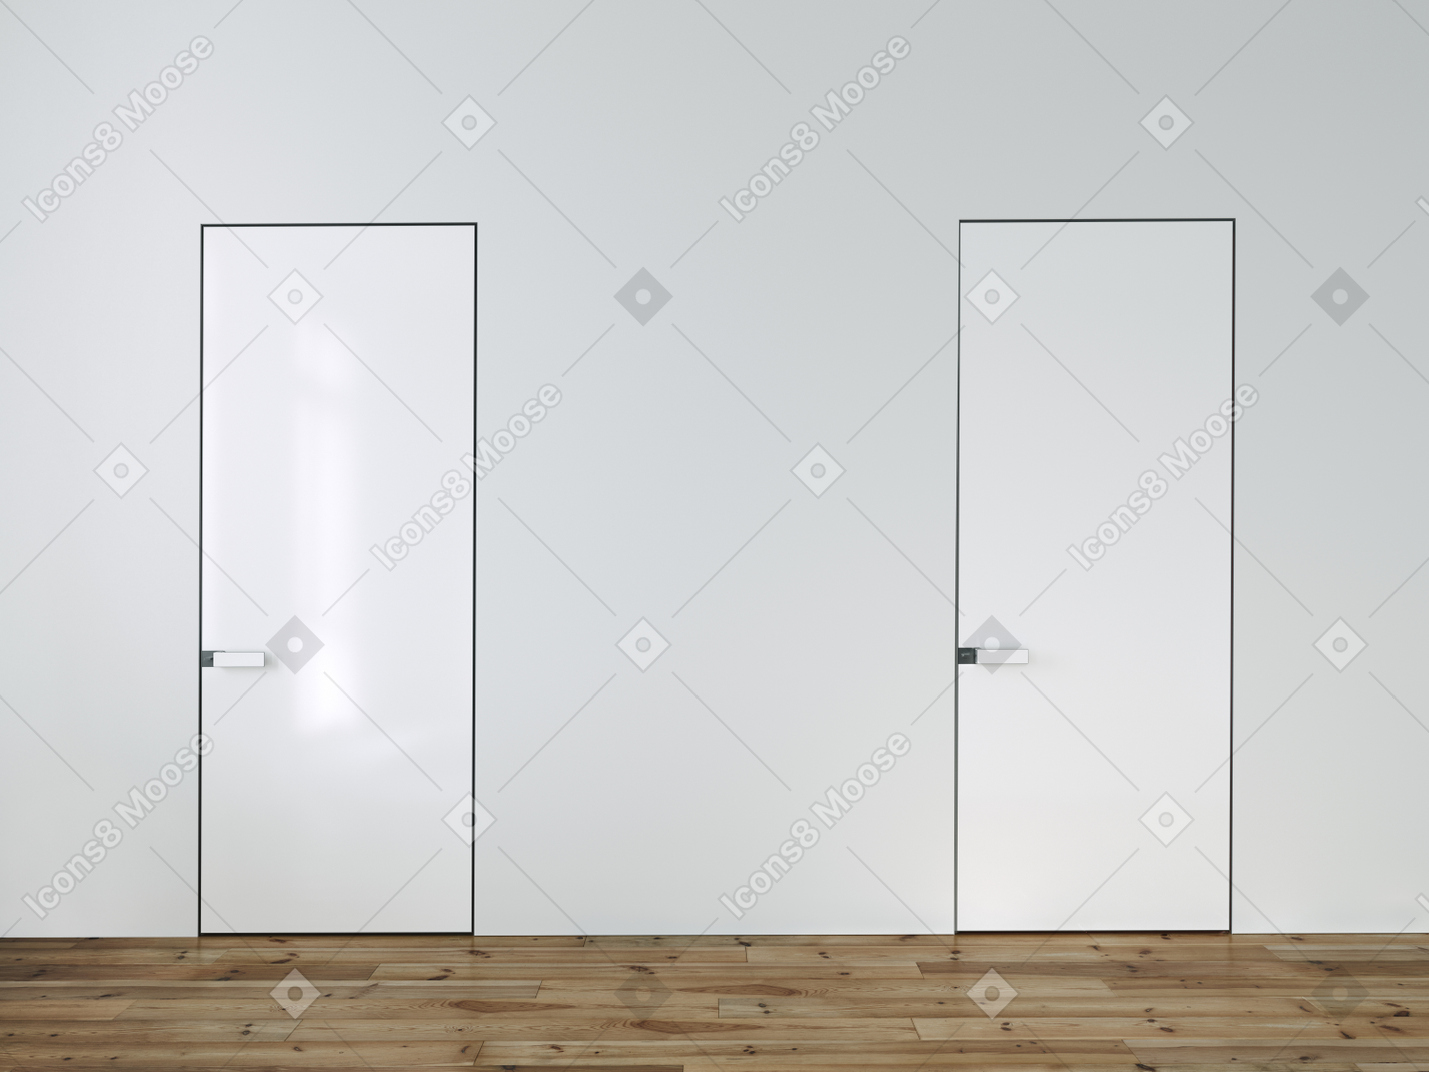 Two doors on a white wall